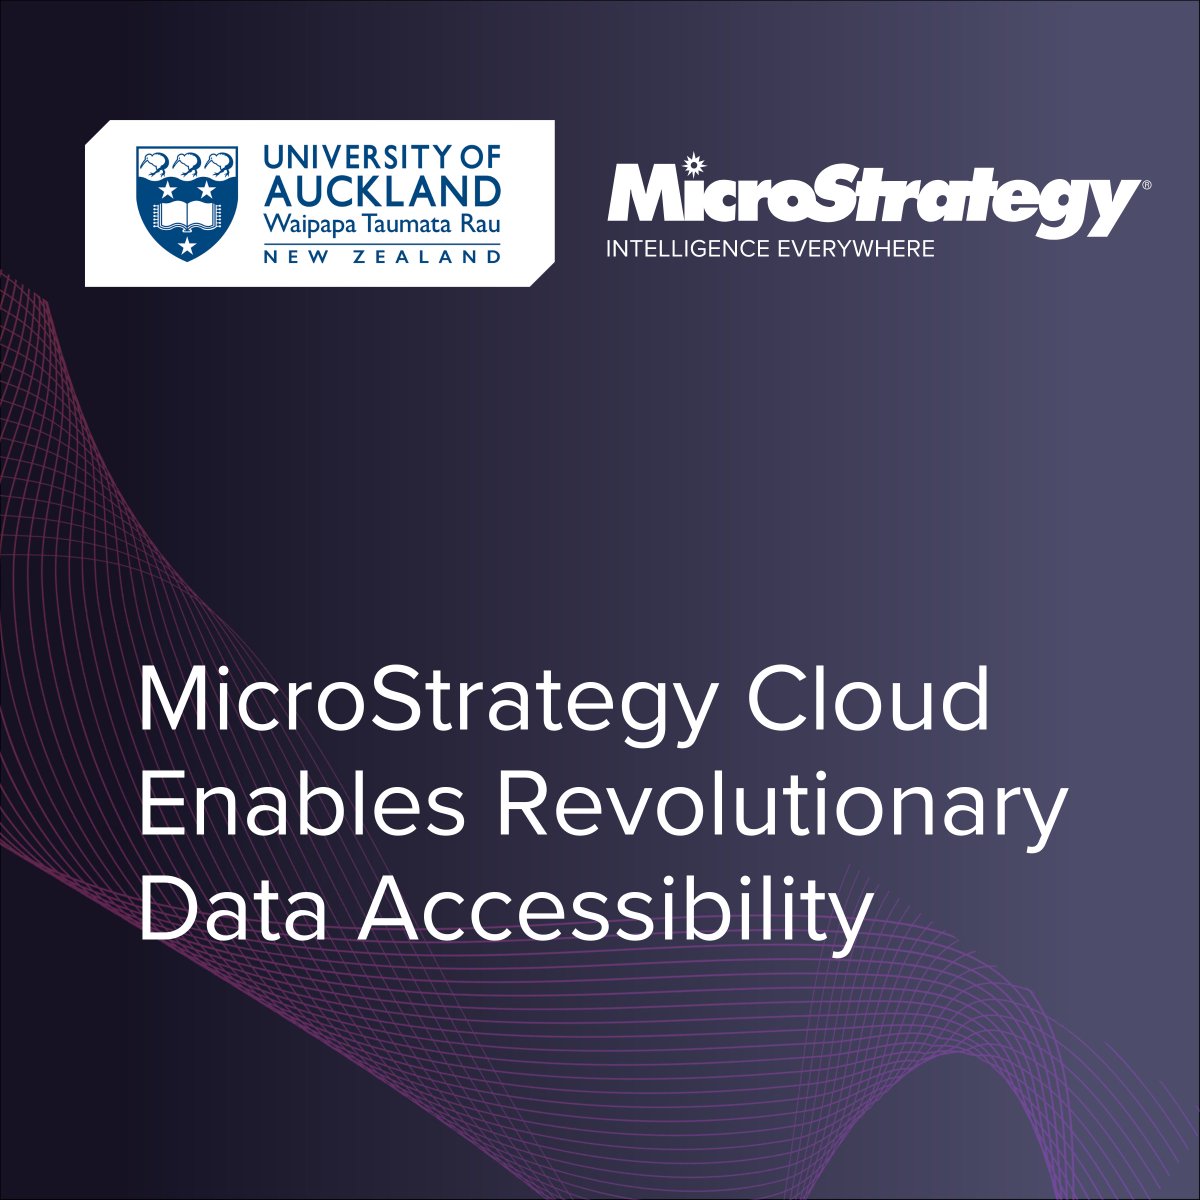 📣 Exciting News! #MicroStrategy Cloud is revolutionizing data accessibility at the University of Auckland! Empowering students & staff with improved data access and real-time insights. 

🔗 Read the full Press Release ow.ly/FiVh50RamOu

#DataAccessibility #Innovation